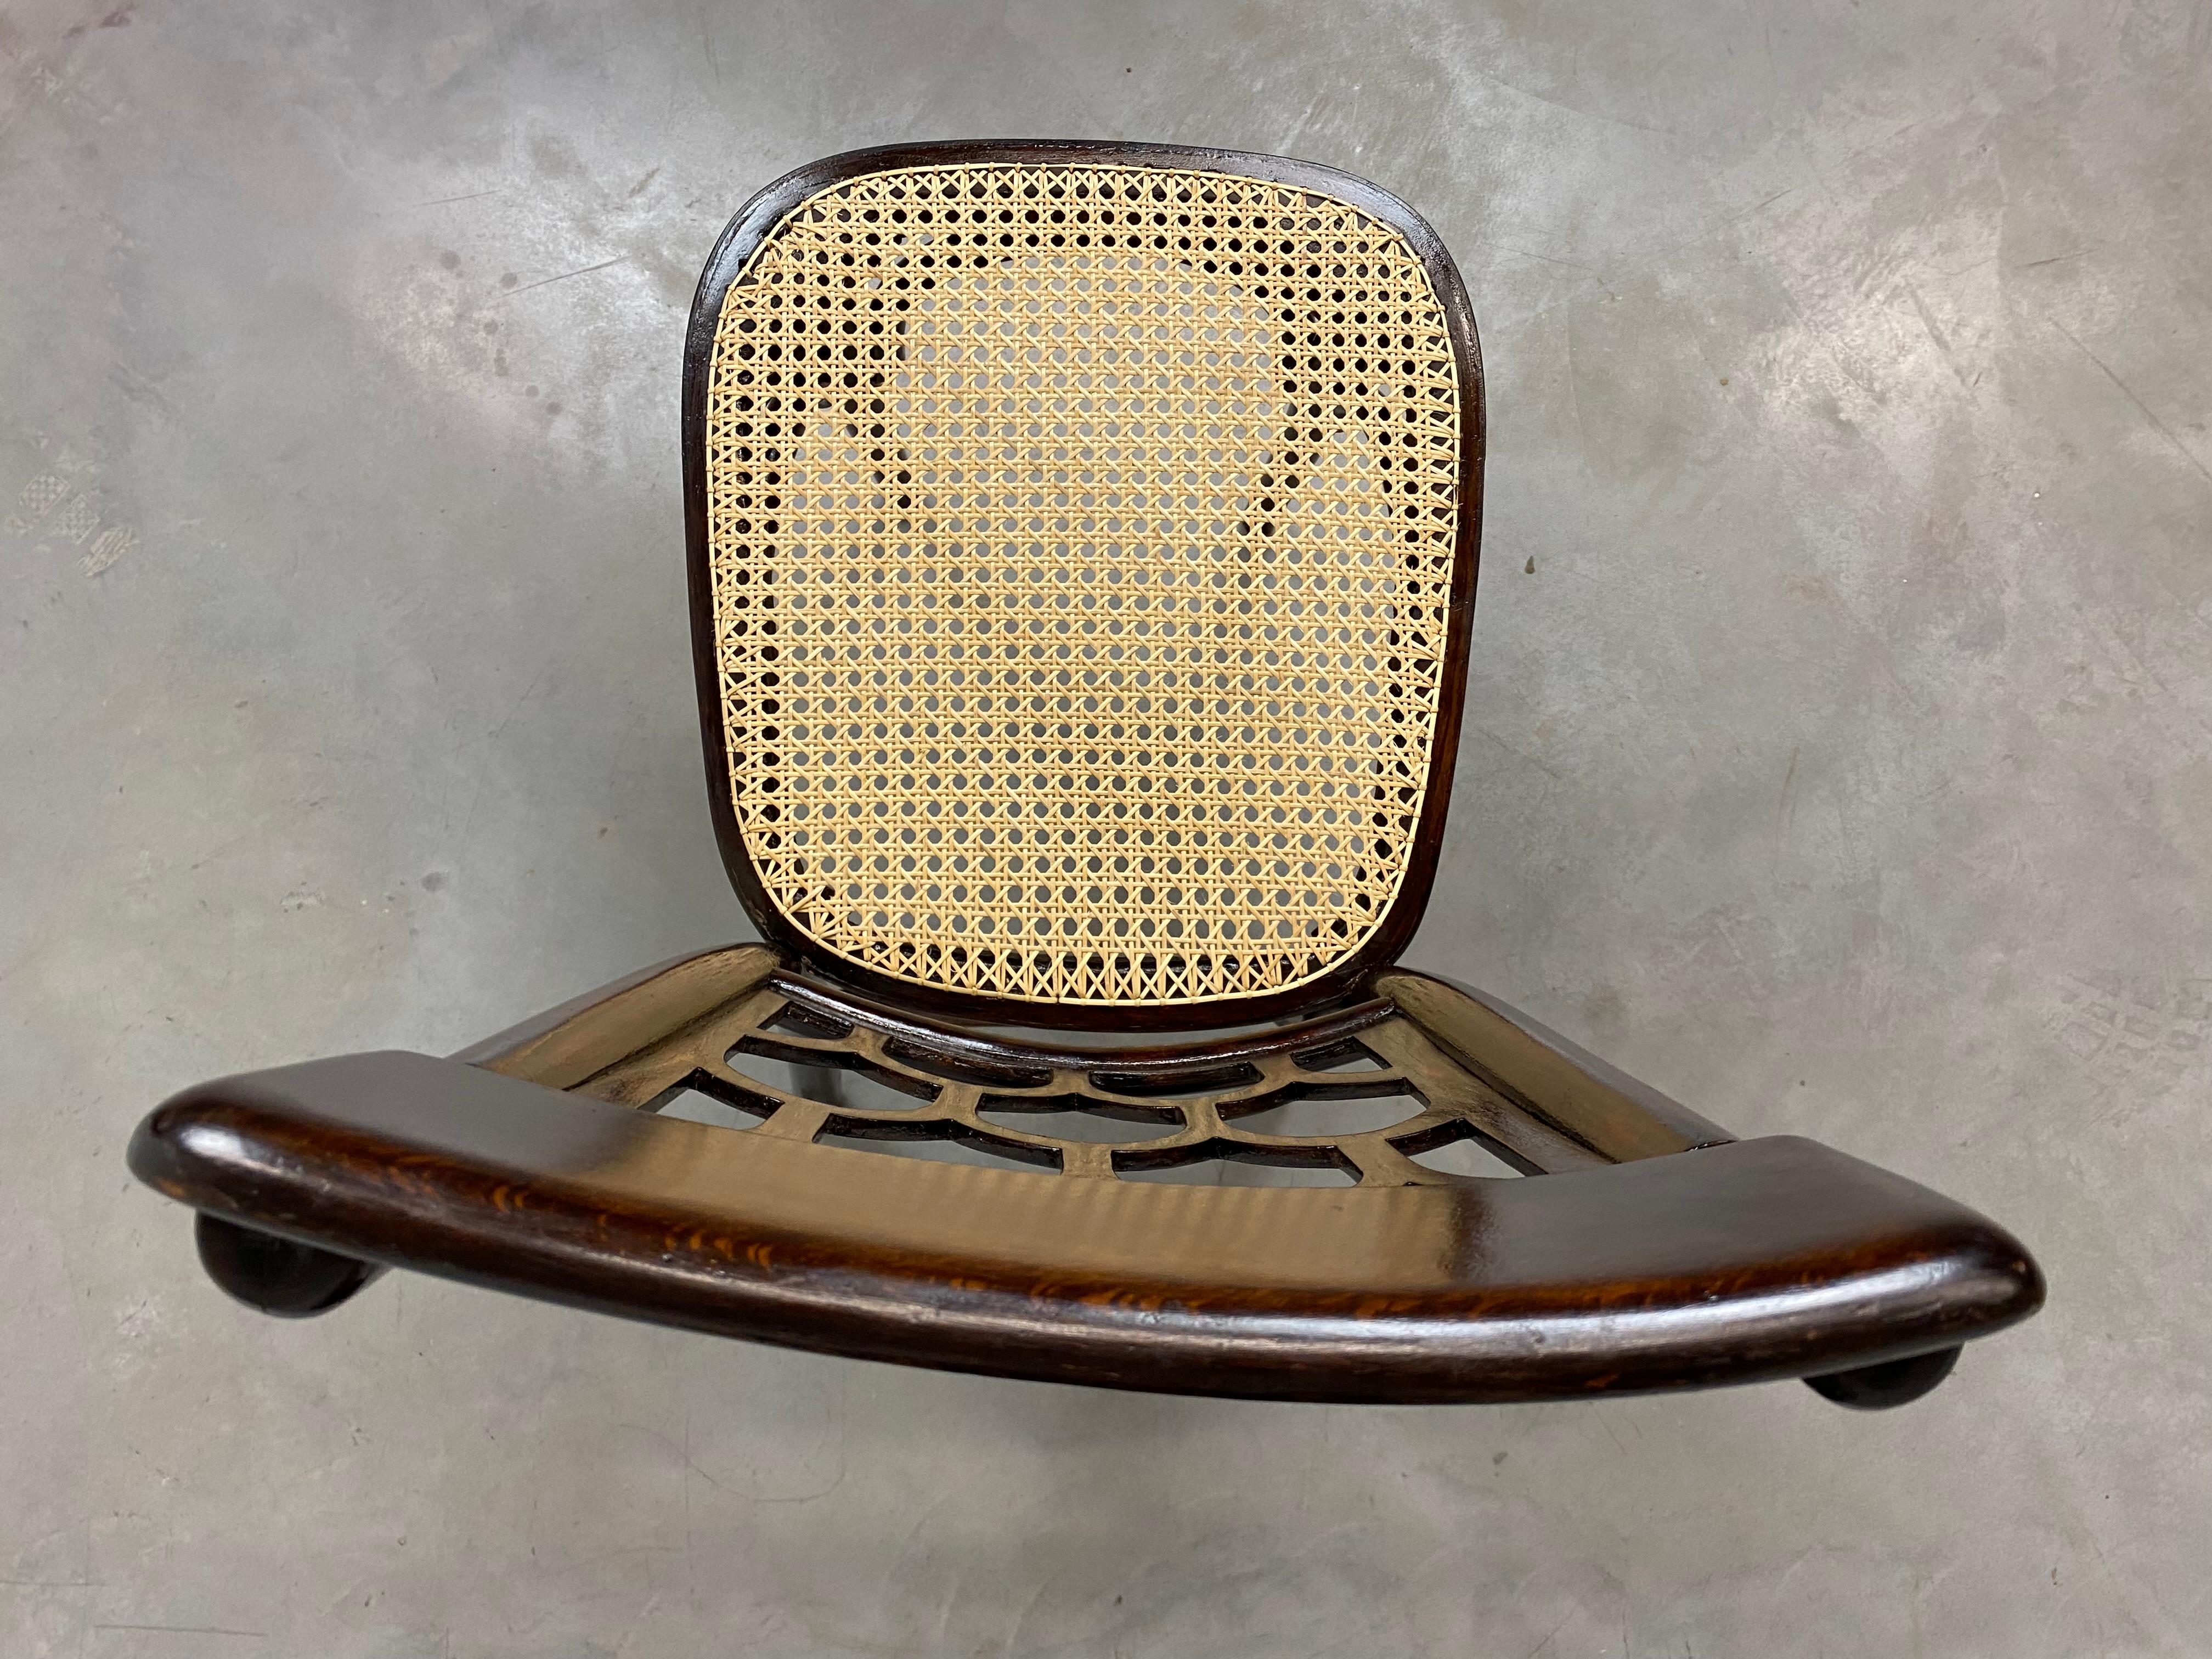 Secession beehive chair by Koloman Moser for J&J Kohn. New handmade rattan seat, professionally stained and repolished.